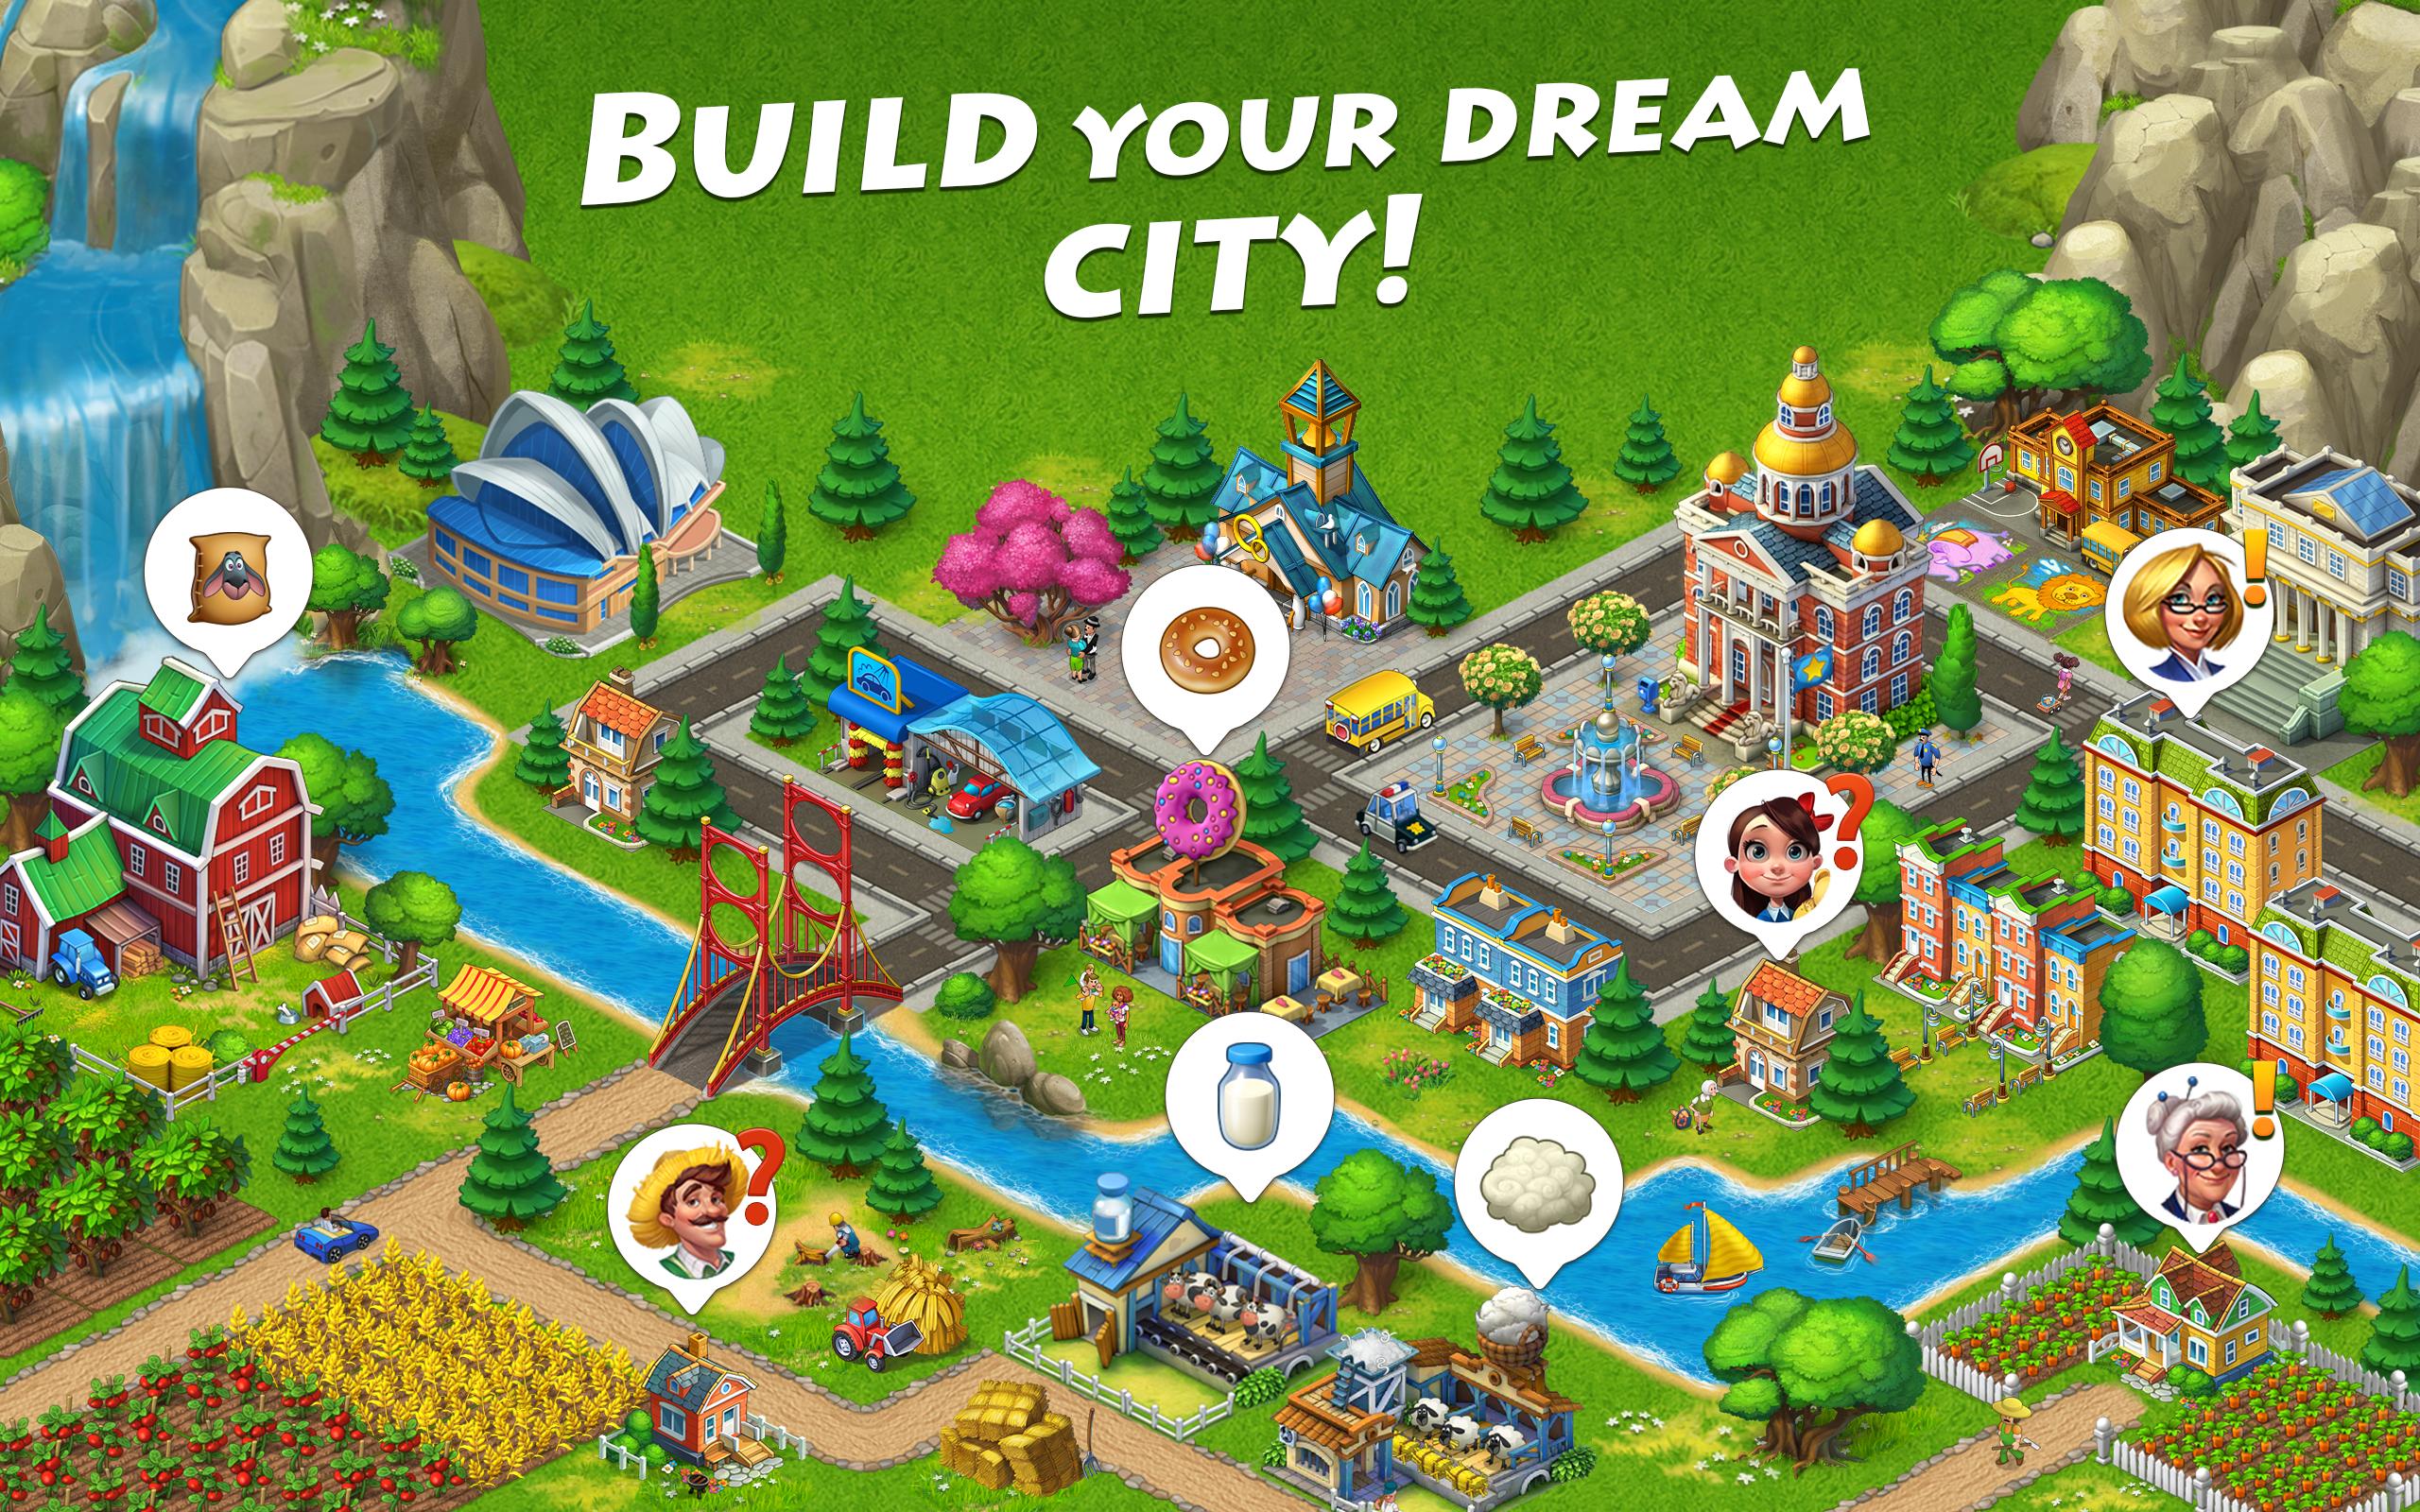 Township for Android - APK Download